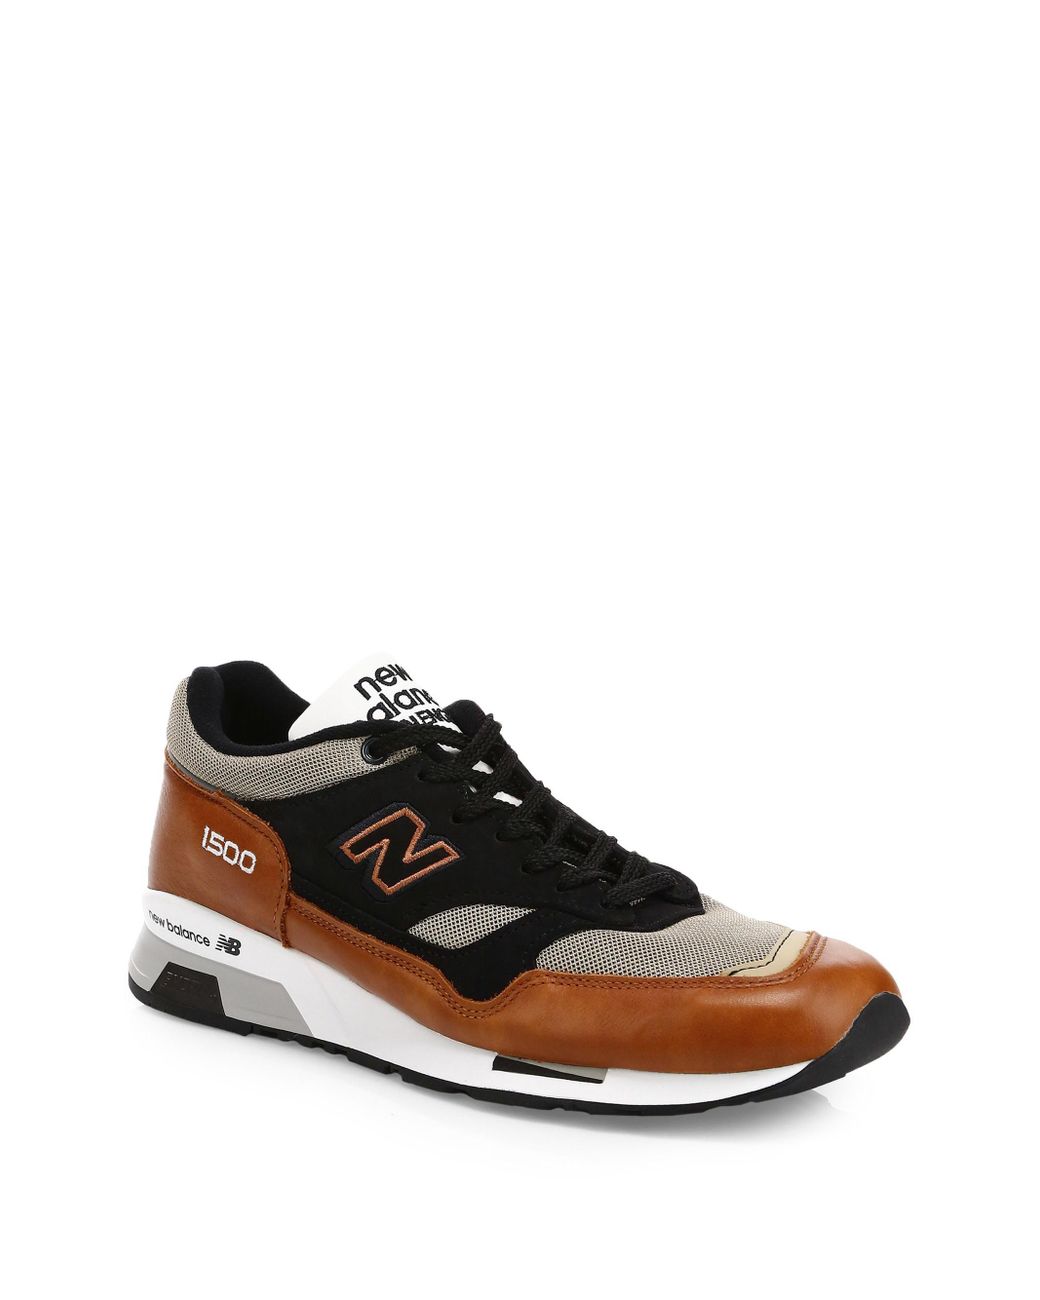 New Balance 1500 Made In Uk Leather Sneakers in Tan Beige (Brown) for Men |  Lyst